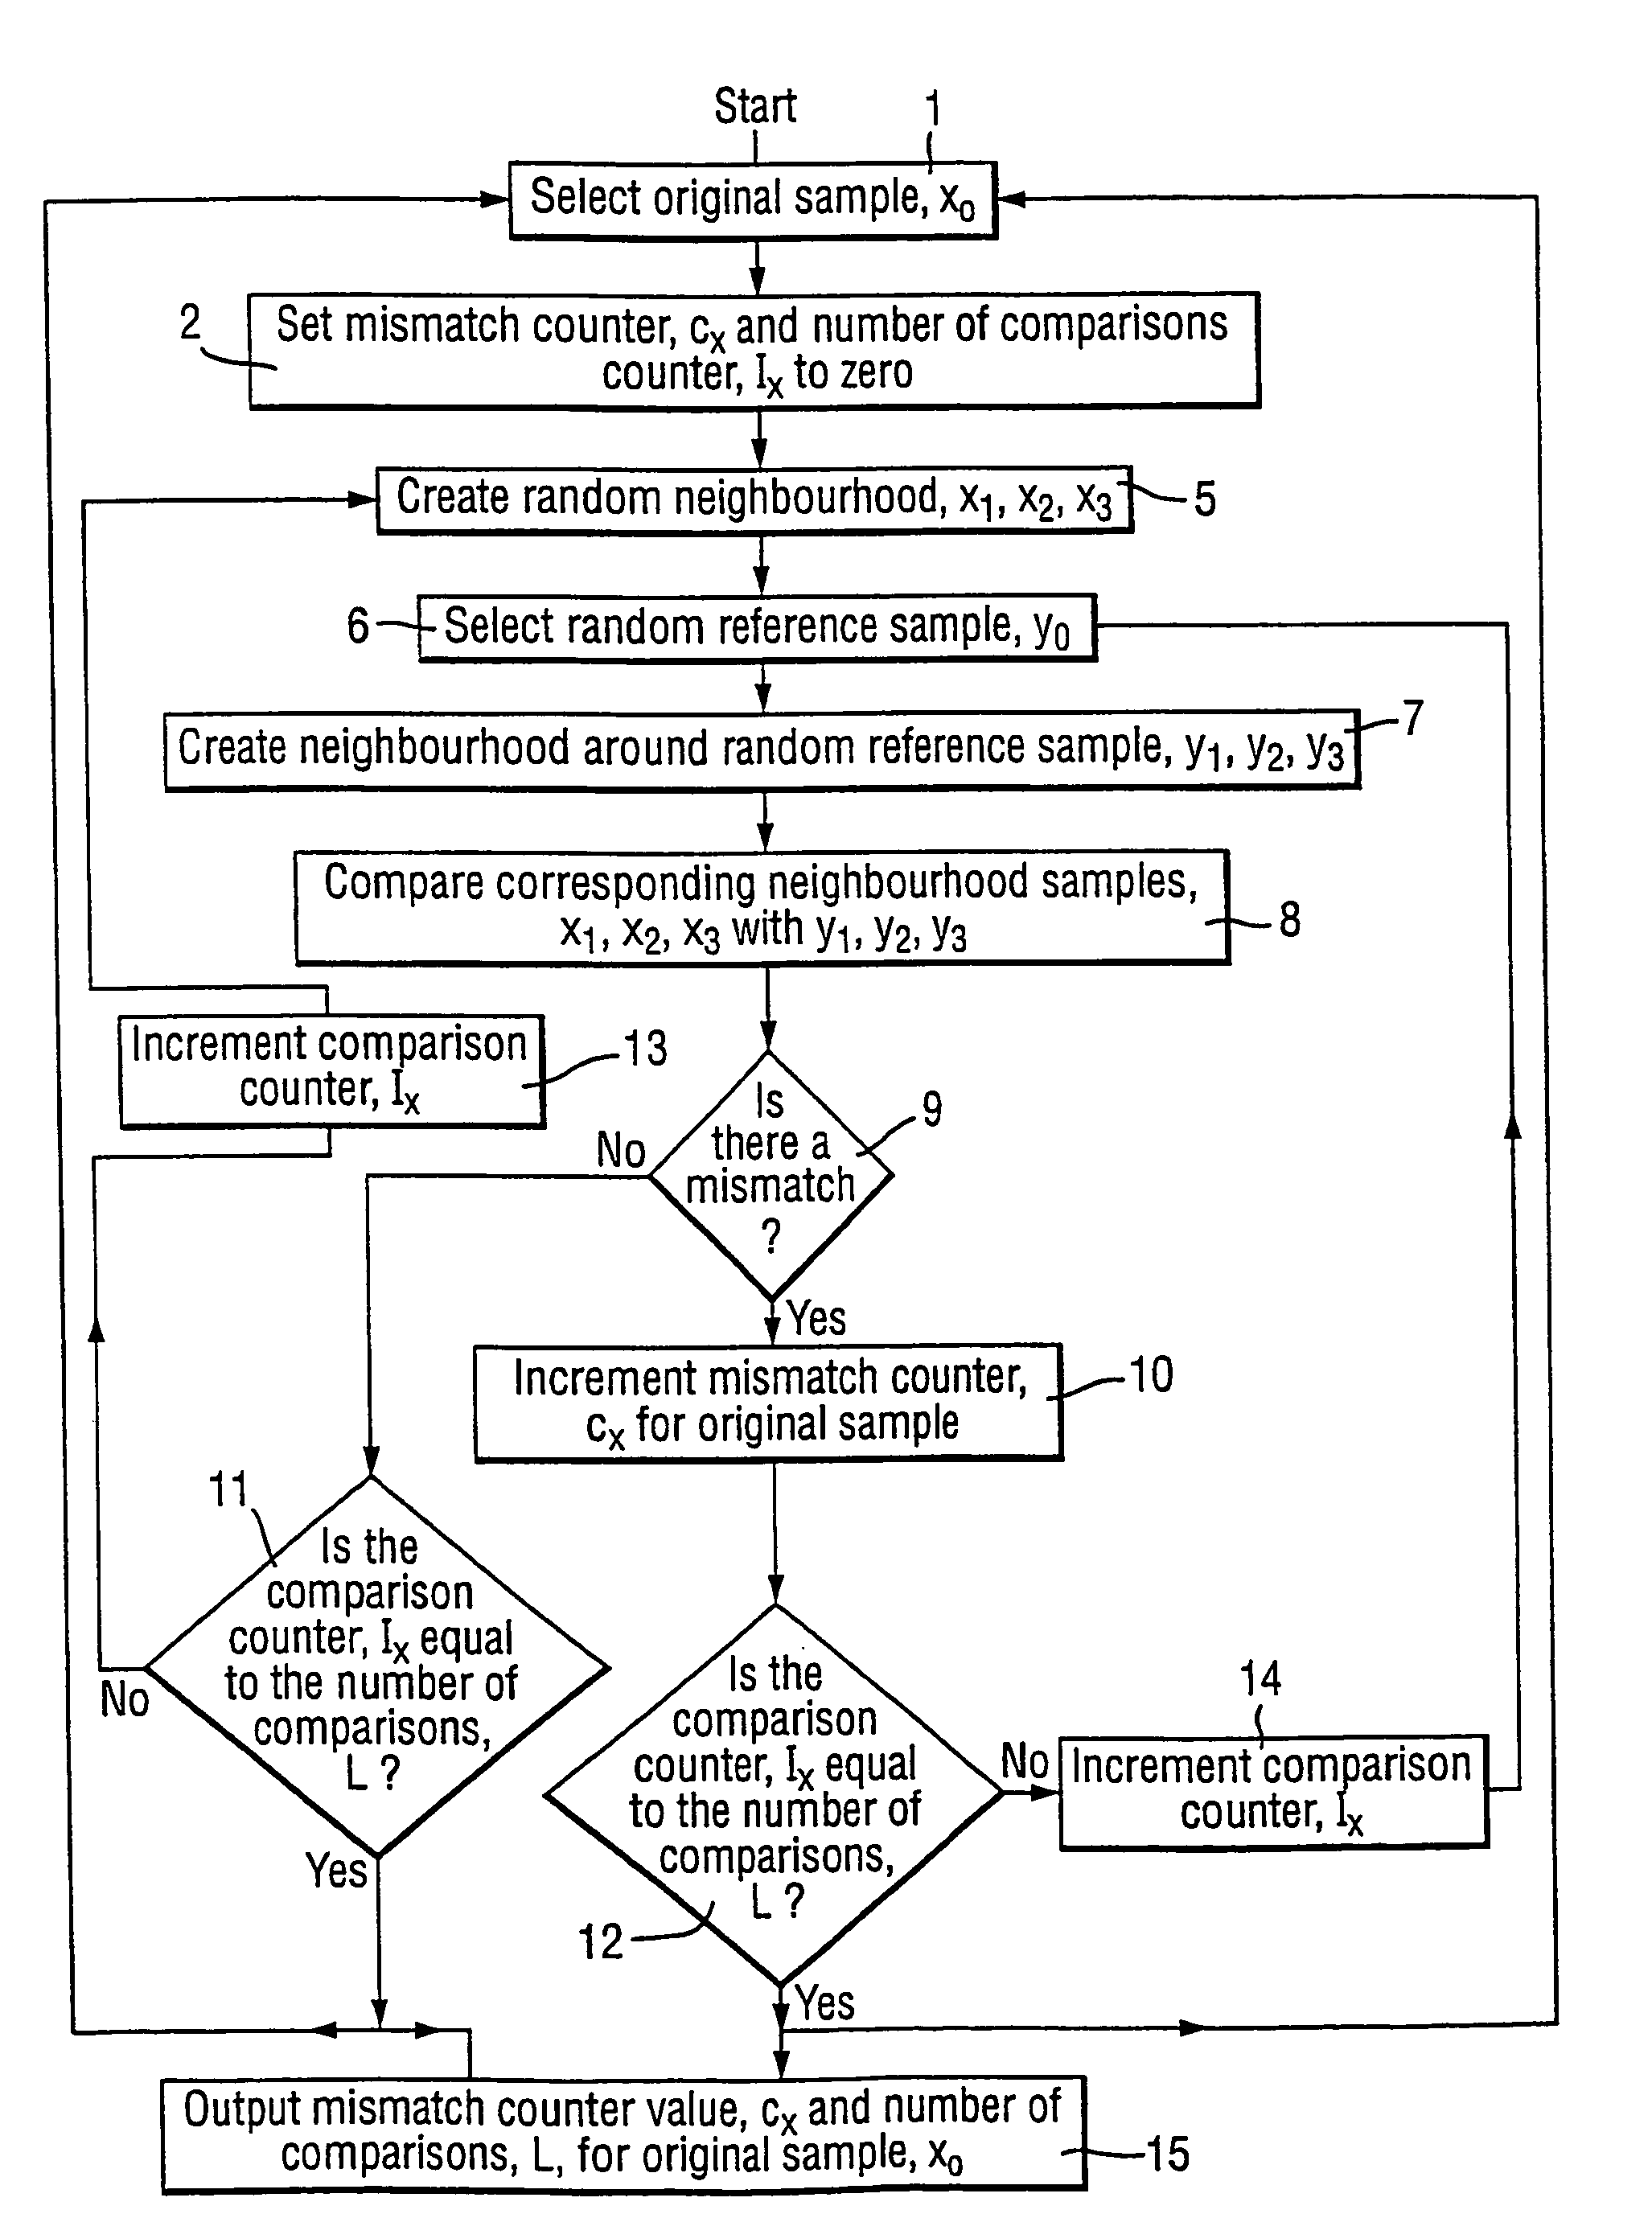 Anomaly recognition method for data streams